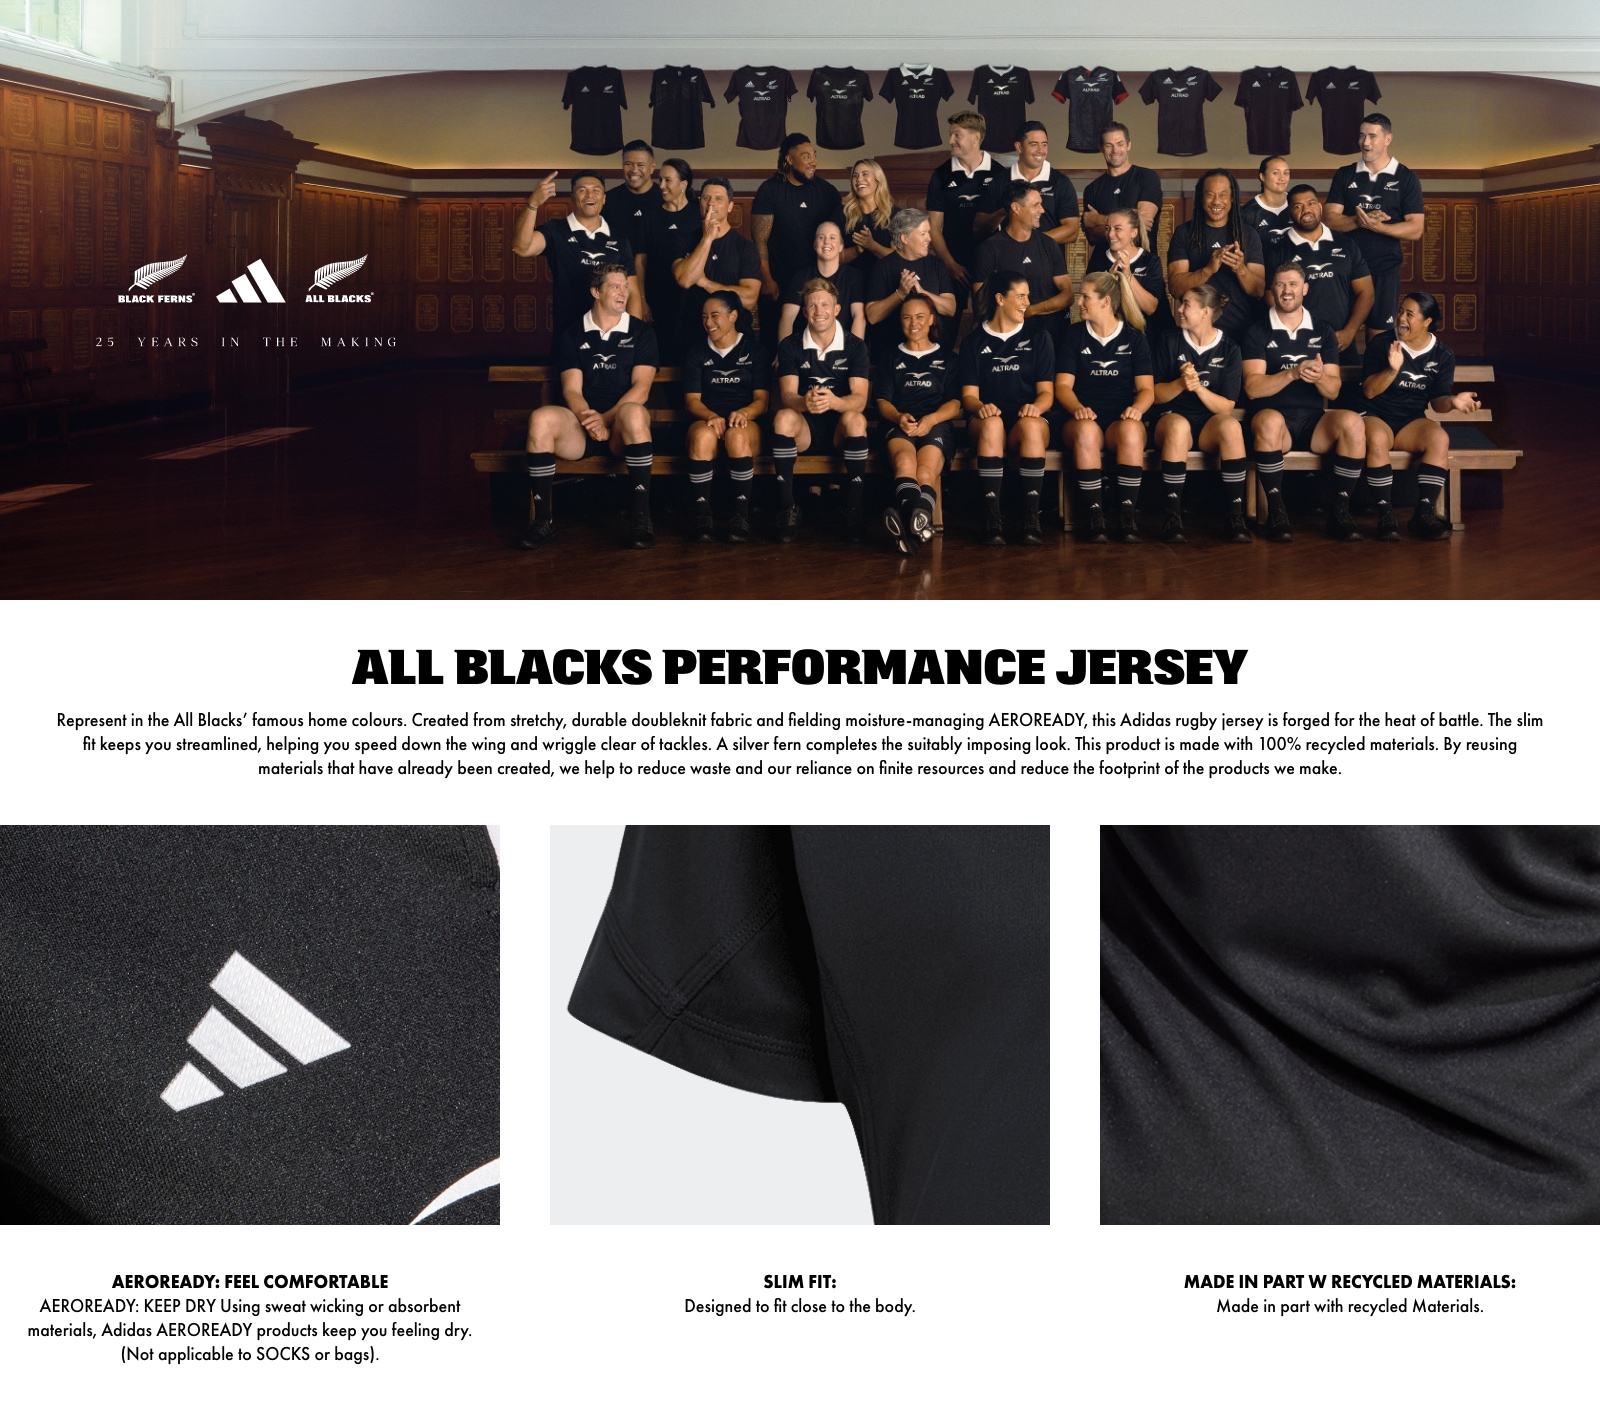 ALL BLACKS PERFORMANCE JERSEY. Represent in the All Blacks' famous home colours. Created from stretchy, durable doubleknit fabric and fielding moisture-managing AEROREADY, this Adidas rugby jersey is forged for the heat of battle. The slim fit keeps you streamlined, helping you speed down the wing and wriggle clear of tackles. A silver fern completes the suitably imposing look. This product is made with 100% recycled materials. By reusing materials that have already been created, we help to reduce waste and our reliance on finite resources and reduce the footprint of the products we make. AEROREADY: FEEL COMFORTABLE. AEROREADY: KEEP DRY Using sweat wicking or absorbent materials, Adidas AEROREADY products keep you feeling dry. (Not applicable to SOCKS or bags). SLIM FIT: Designed to fit close to the body. MADE IN PART W RECYCLED MATERIALS: Made in part with recycled Materials.